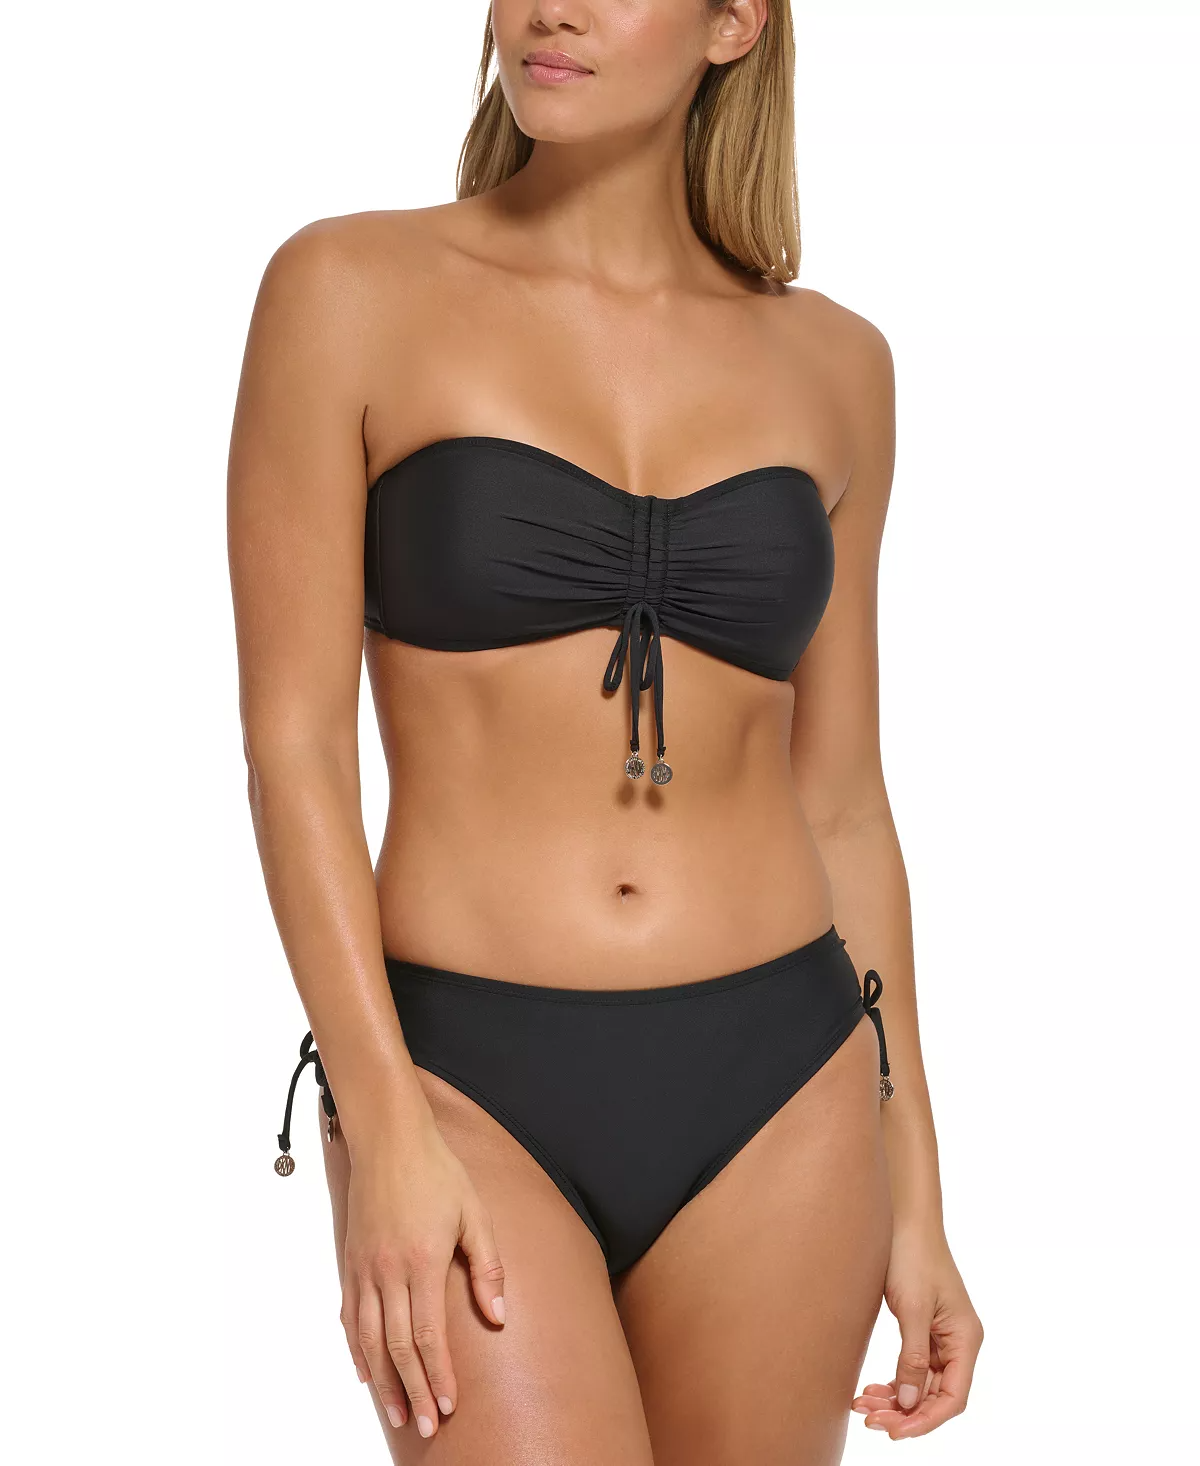 Hourglass Body Type Bandeau Top Swimsuit